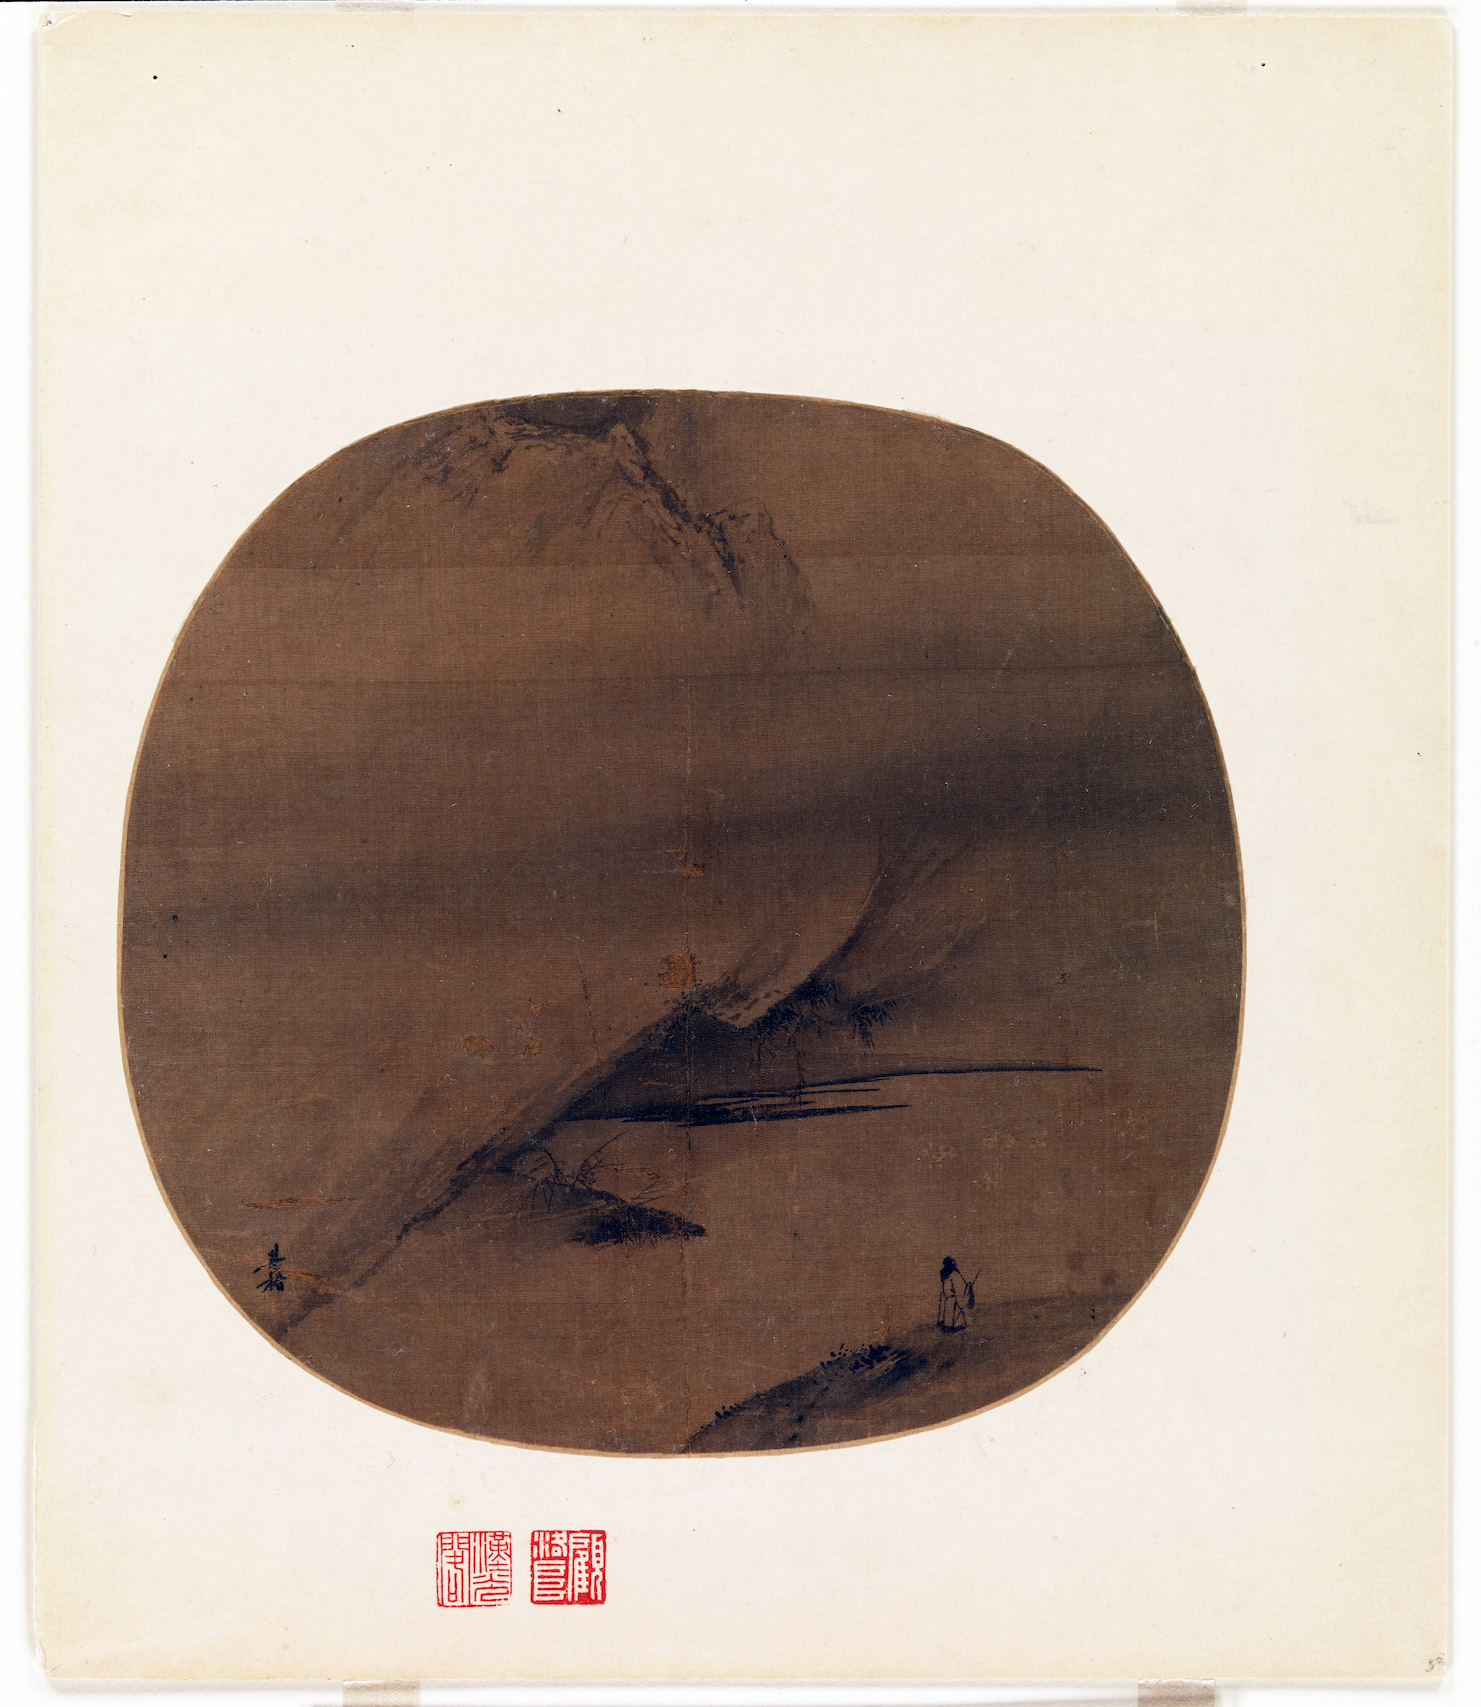 Liang Kai, Poet strolling by a marshy bank, early 13th century, Southern Song dynasty, fan mounted as an album leaf; ink on silk, 22.9 x 24.3 cm, China (The Metropolitan Museum of Art)